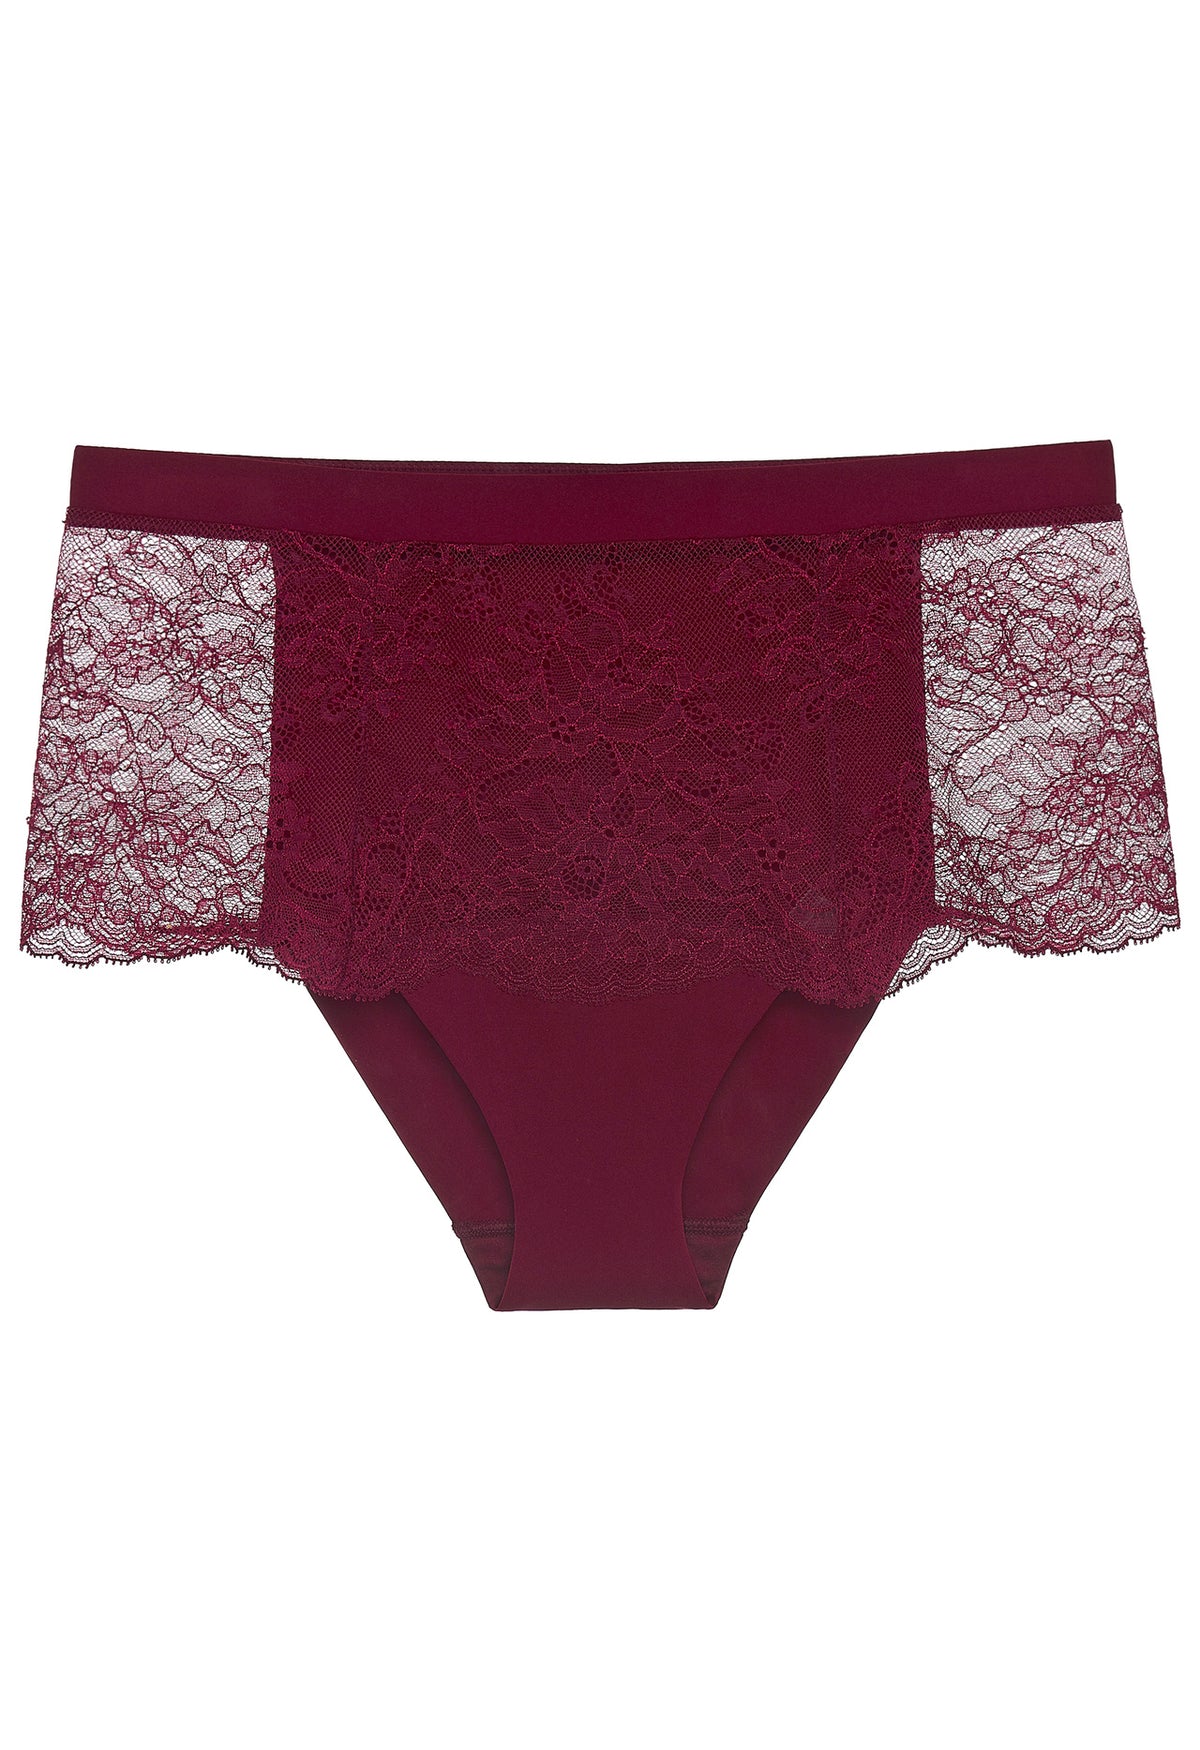 Cranberry Leavers lace high-waisted brief